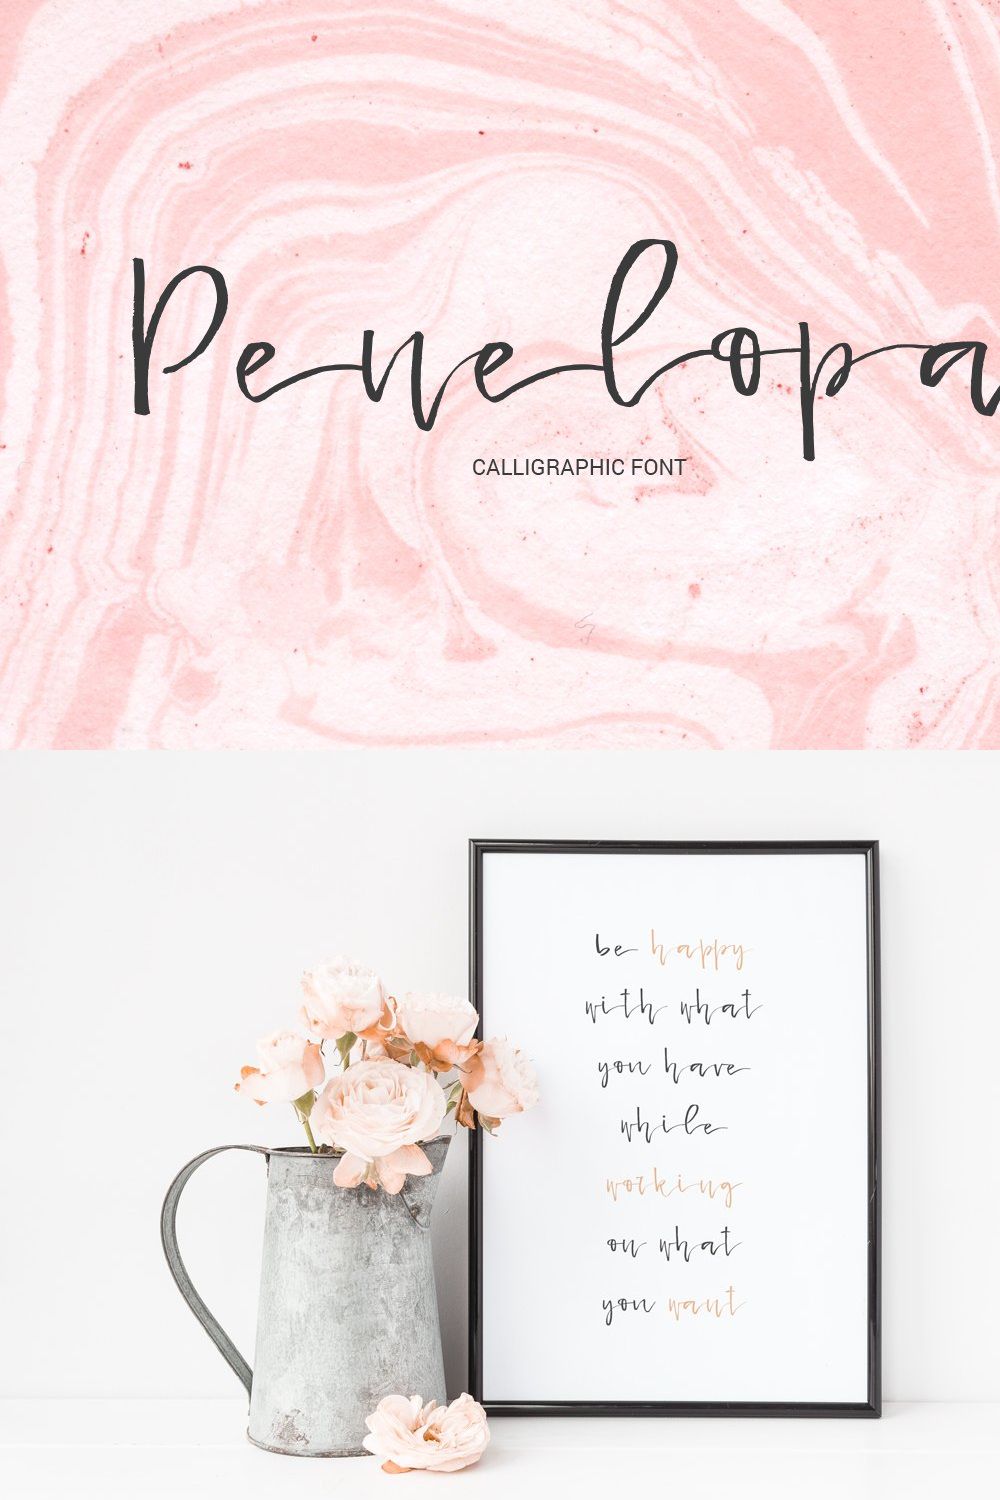 Penelopa - gentle calligraphic font pinterest preview image.